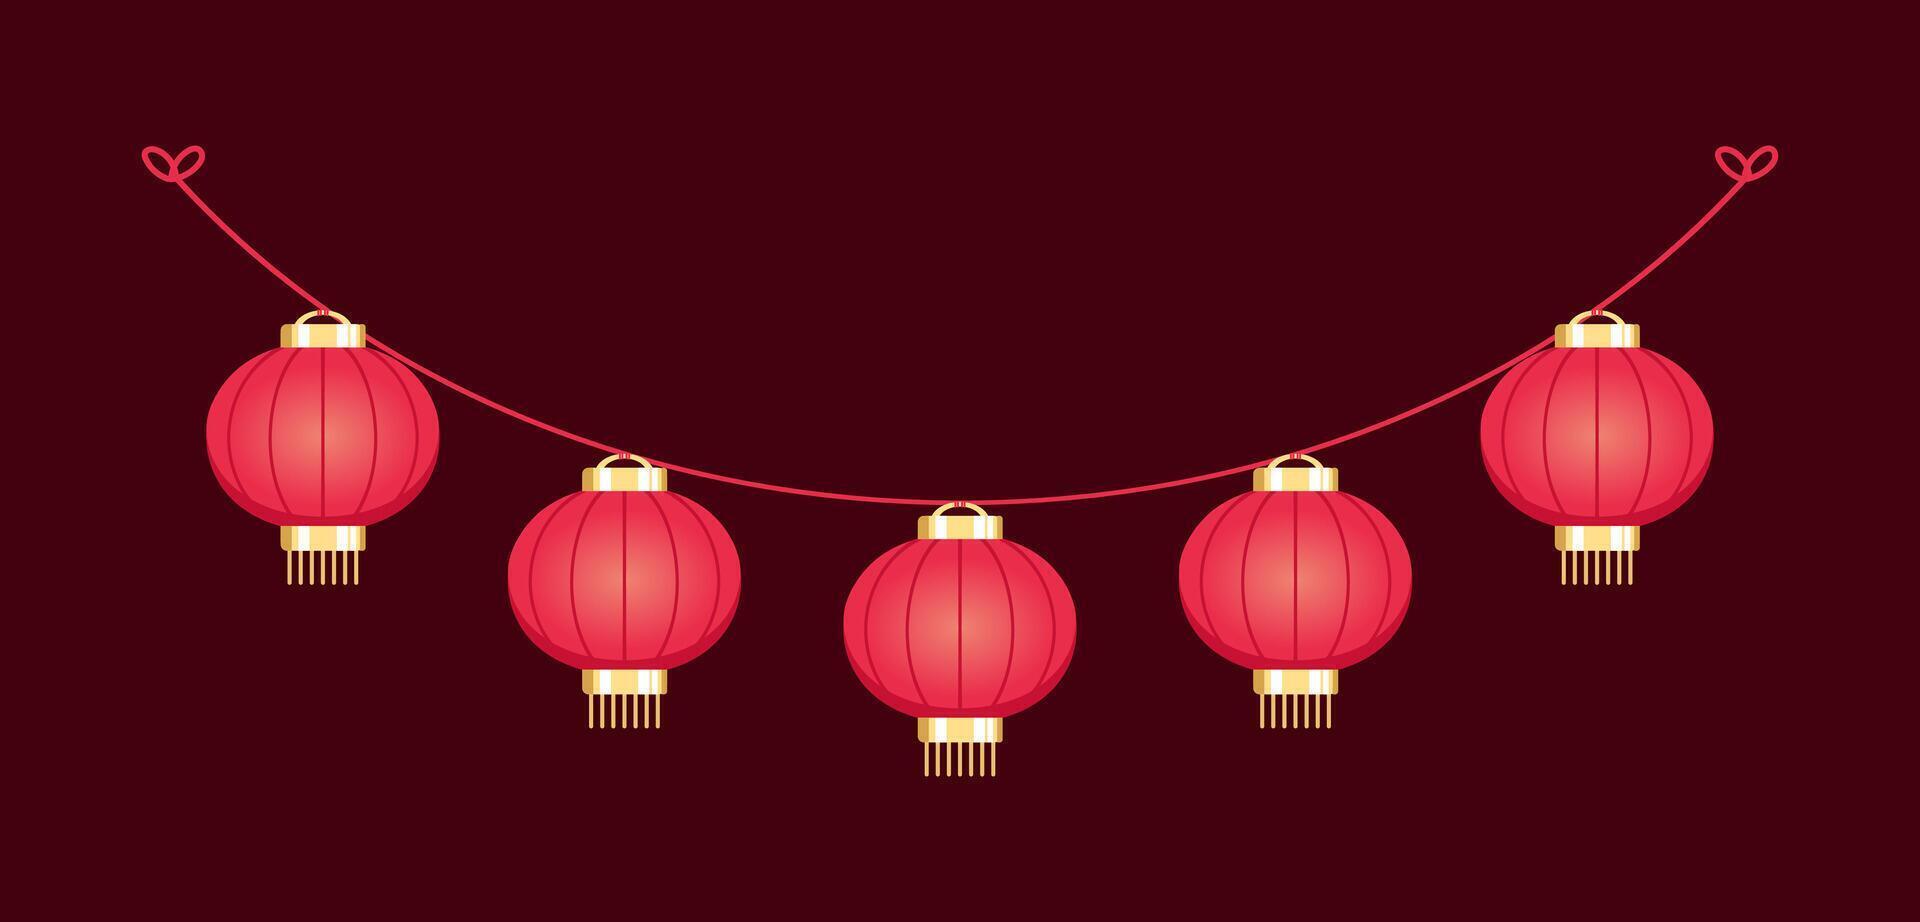 Chinese Lantern Hanging Garland, Lunar New Year and Mid-Autumn Festival Decoration Graphic vector